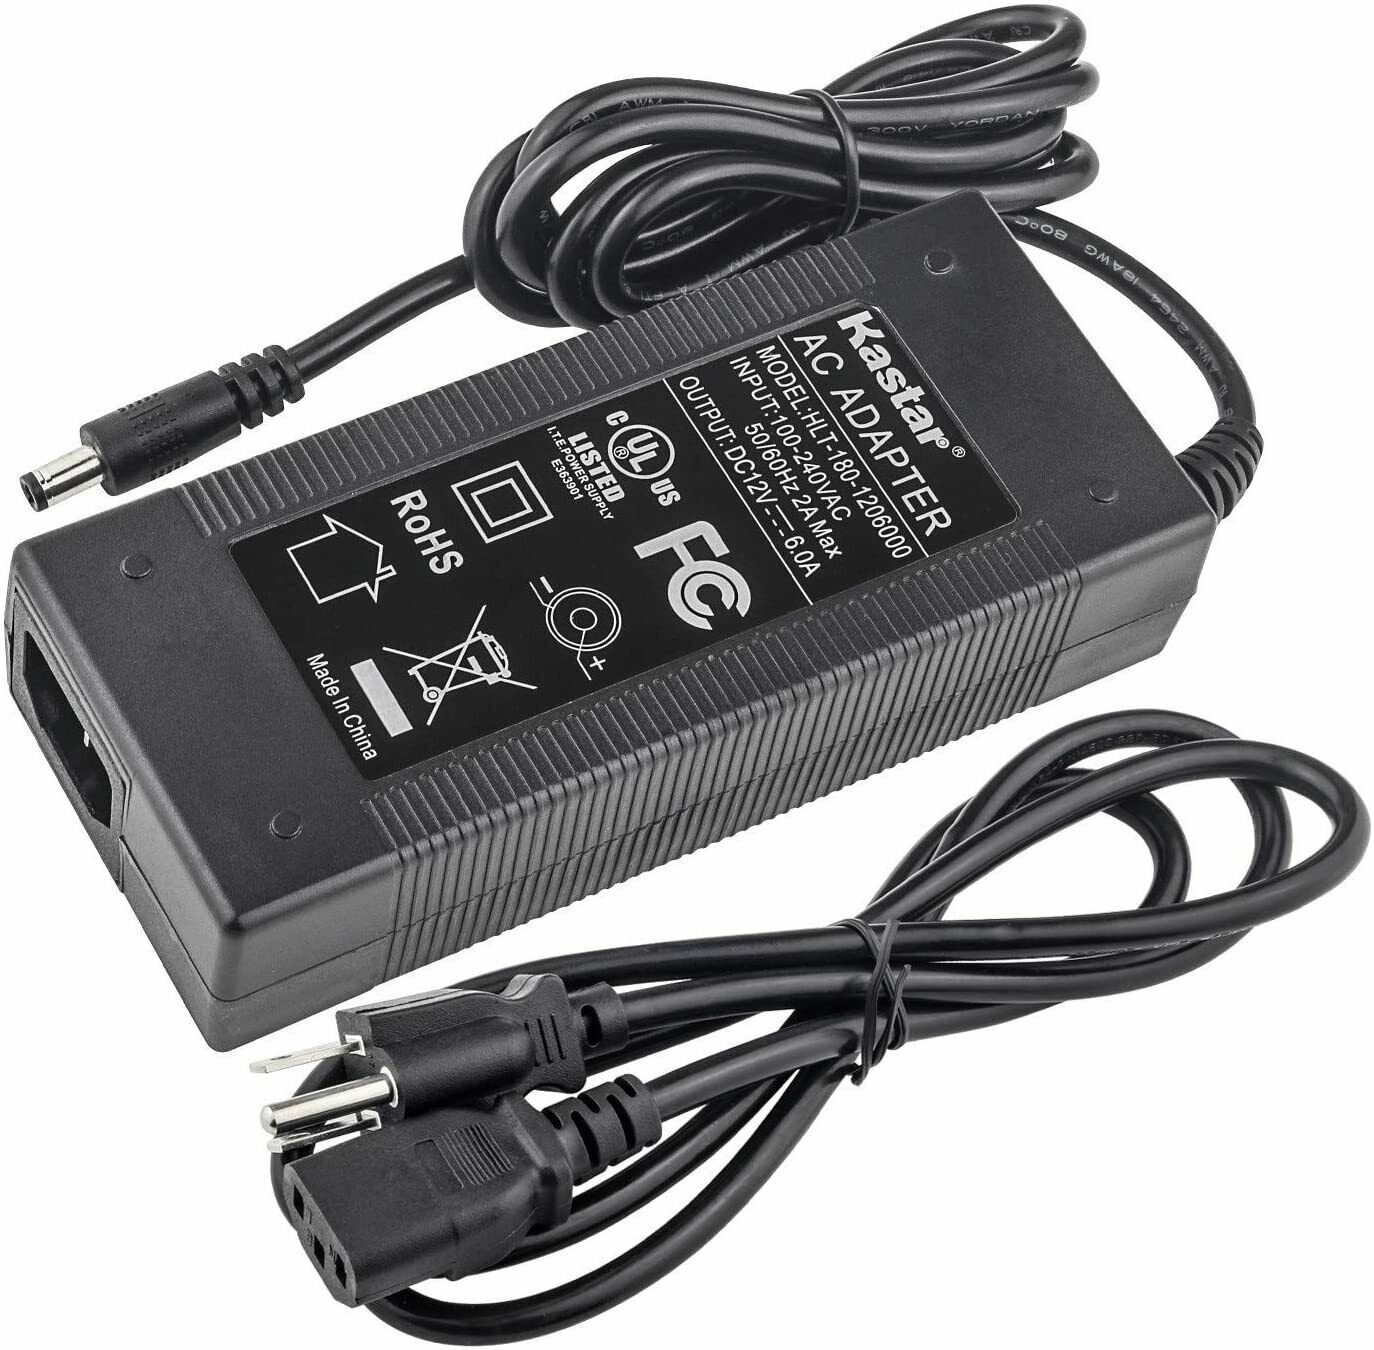 Kastar UL AC Adapter, Power Supply 12V 6A 72W, Tip size 5.5*2.5mm for LCD Monito Connection Split/Duplication: 1:2 Typ